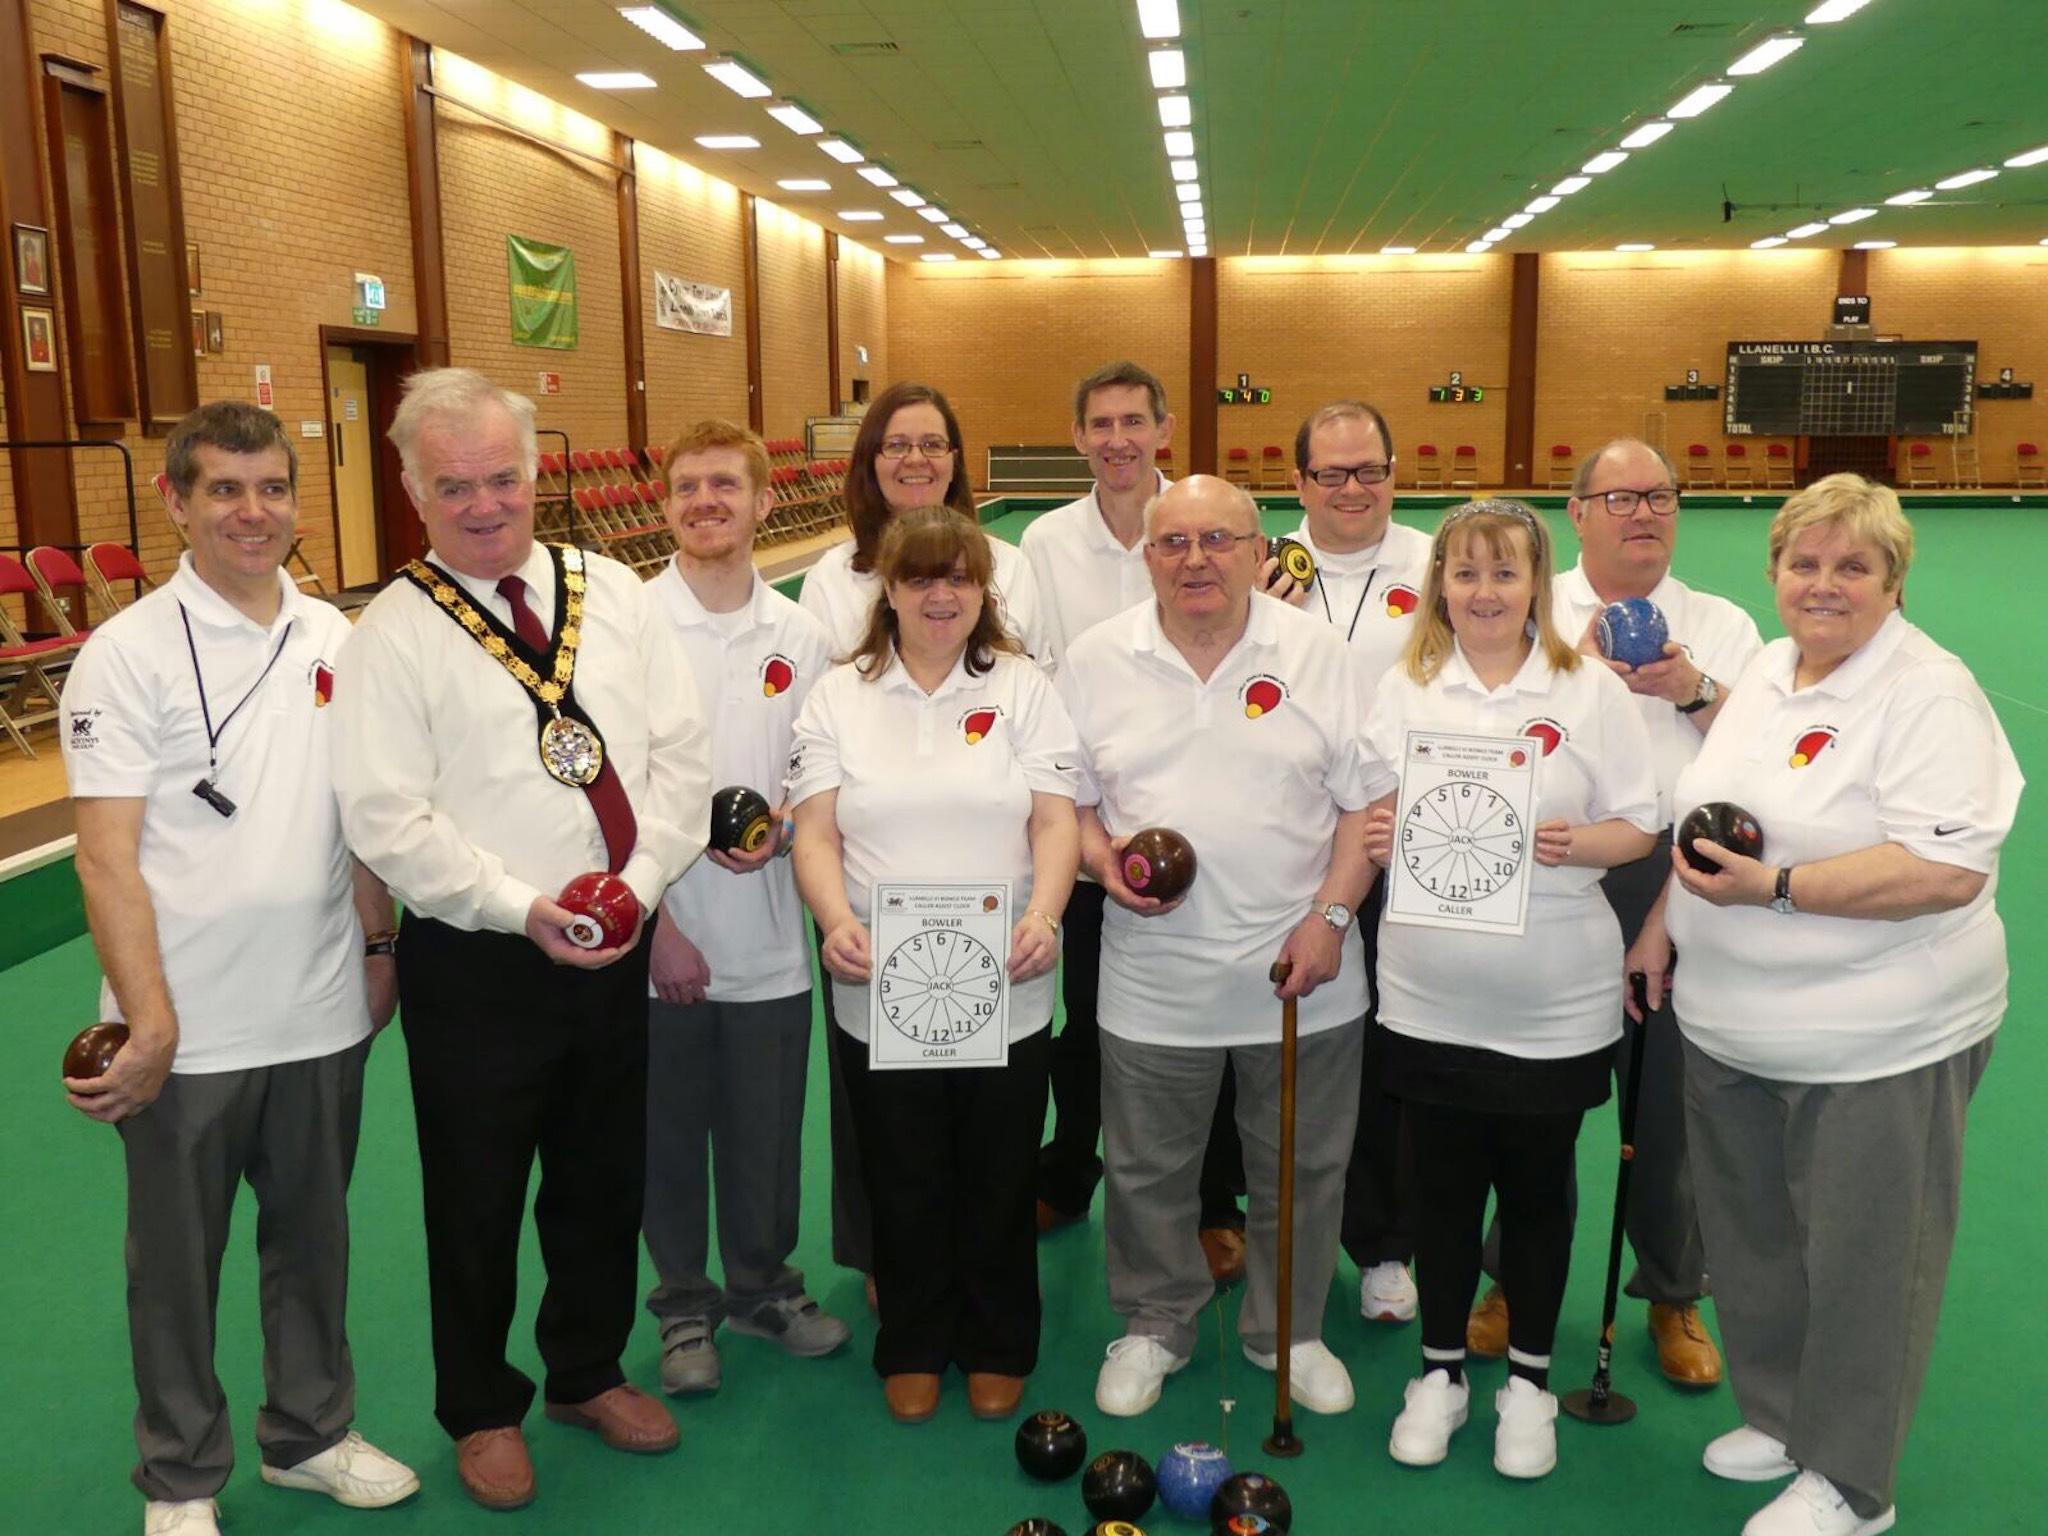 Stephen Ricketts (left) started the Llanelli Visually Impaired Bowls Club in Wales after he unexpectedly went blind